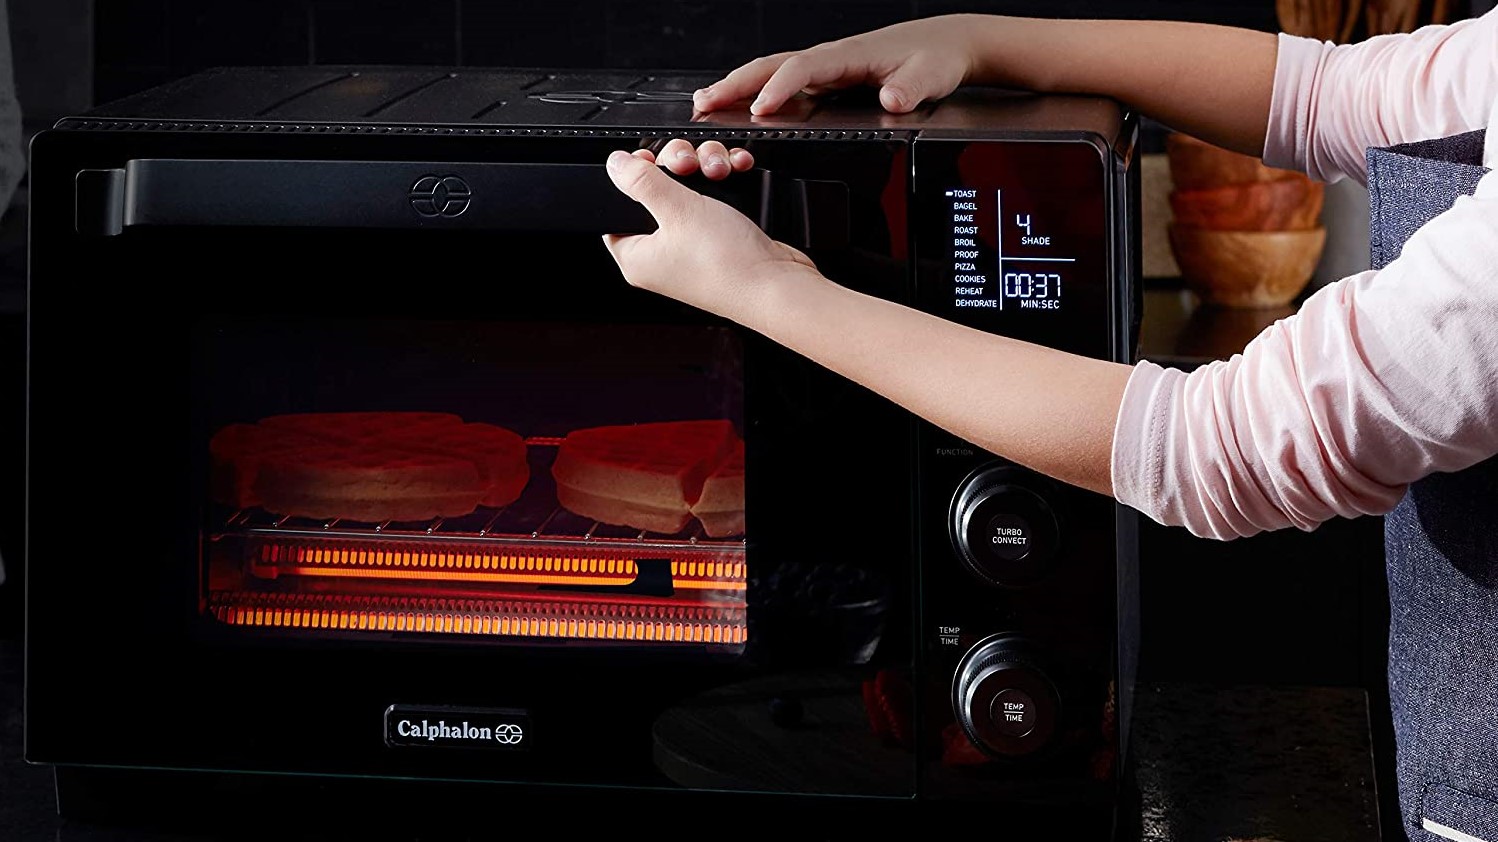 Wolf Gourmet Countertop Oven - Review